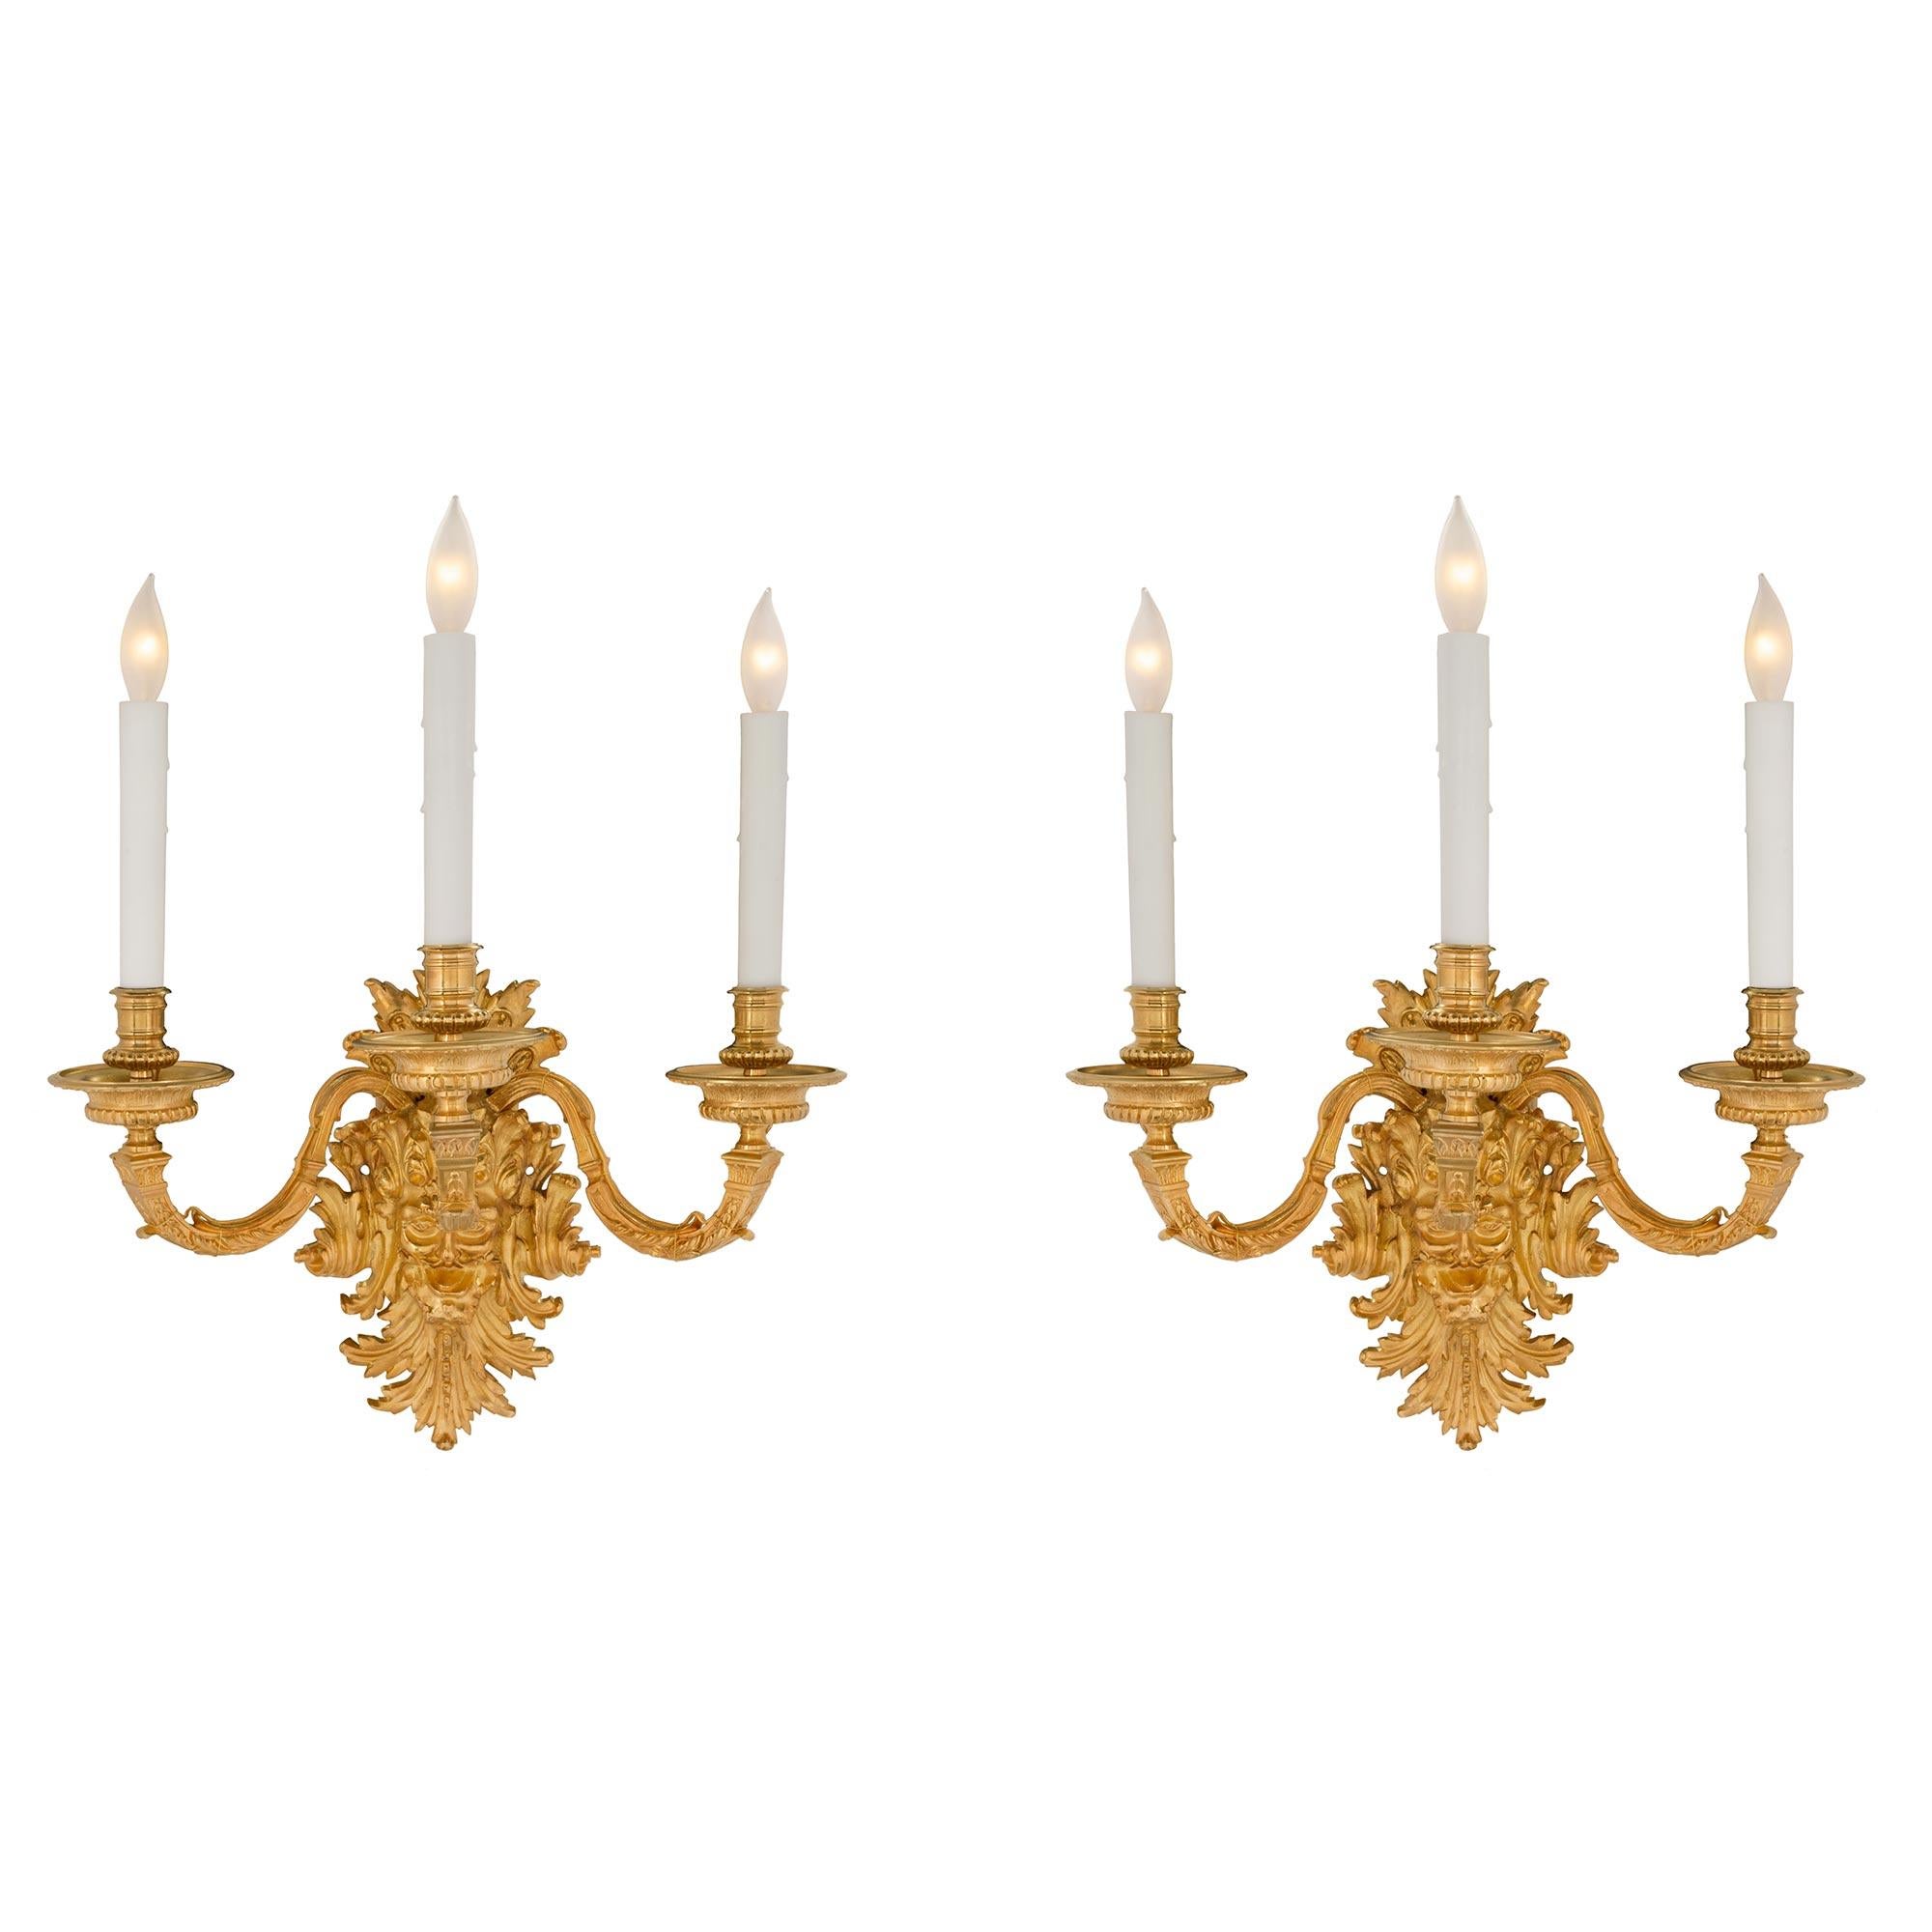 A handsome and most impressive pair of French mid 19th century Louis XIV st. ormolu three arm sconces. The sconces have a fanciful and very decorative backplate with scrolled acanthus leaves and a central masculine mask. Above the mask are the three